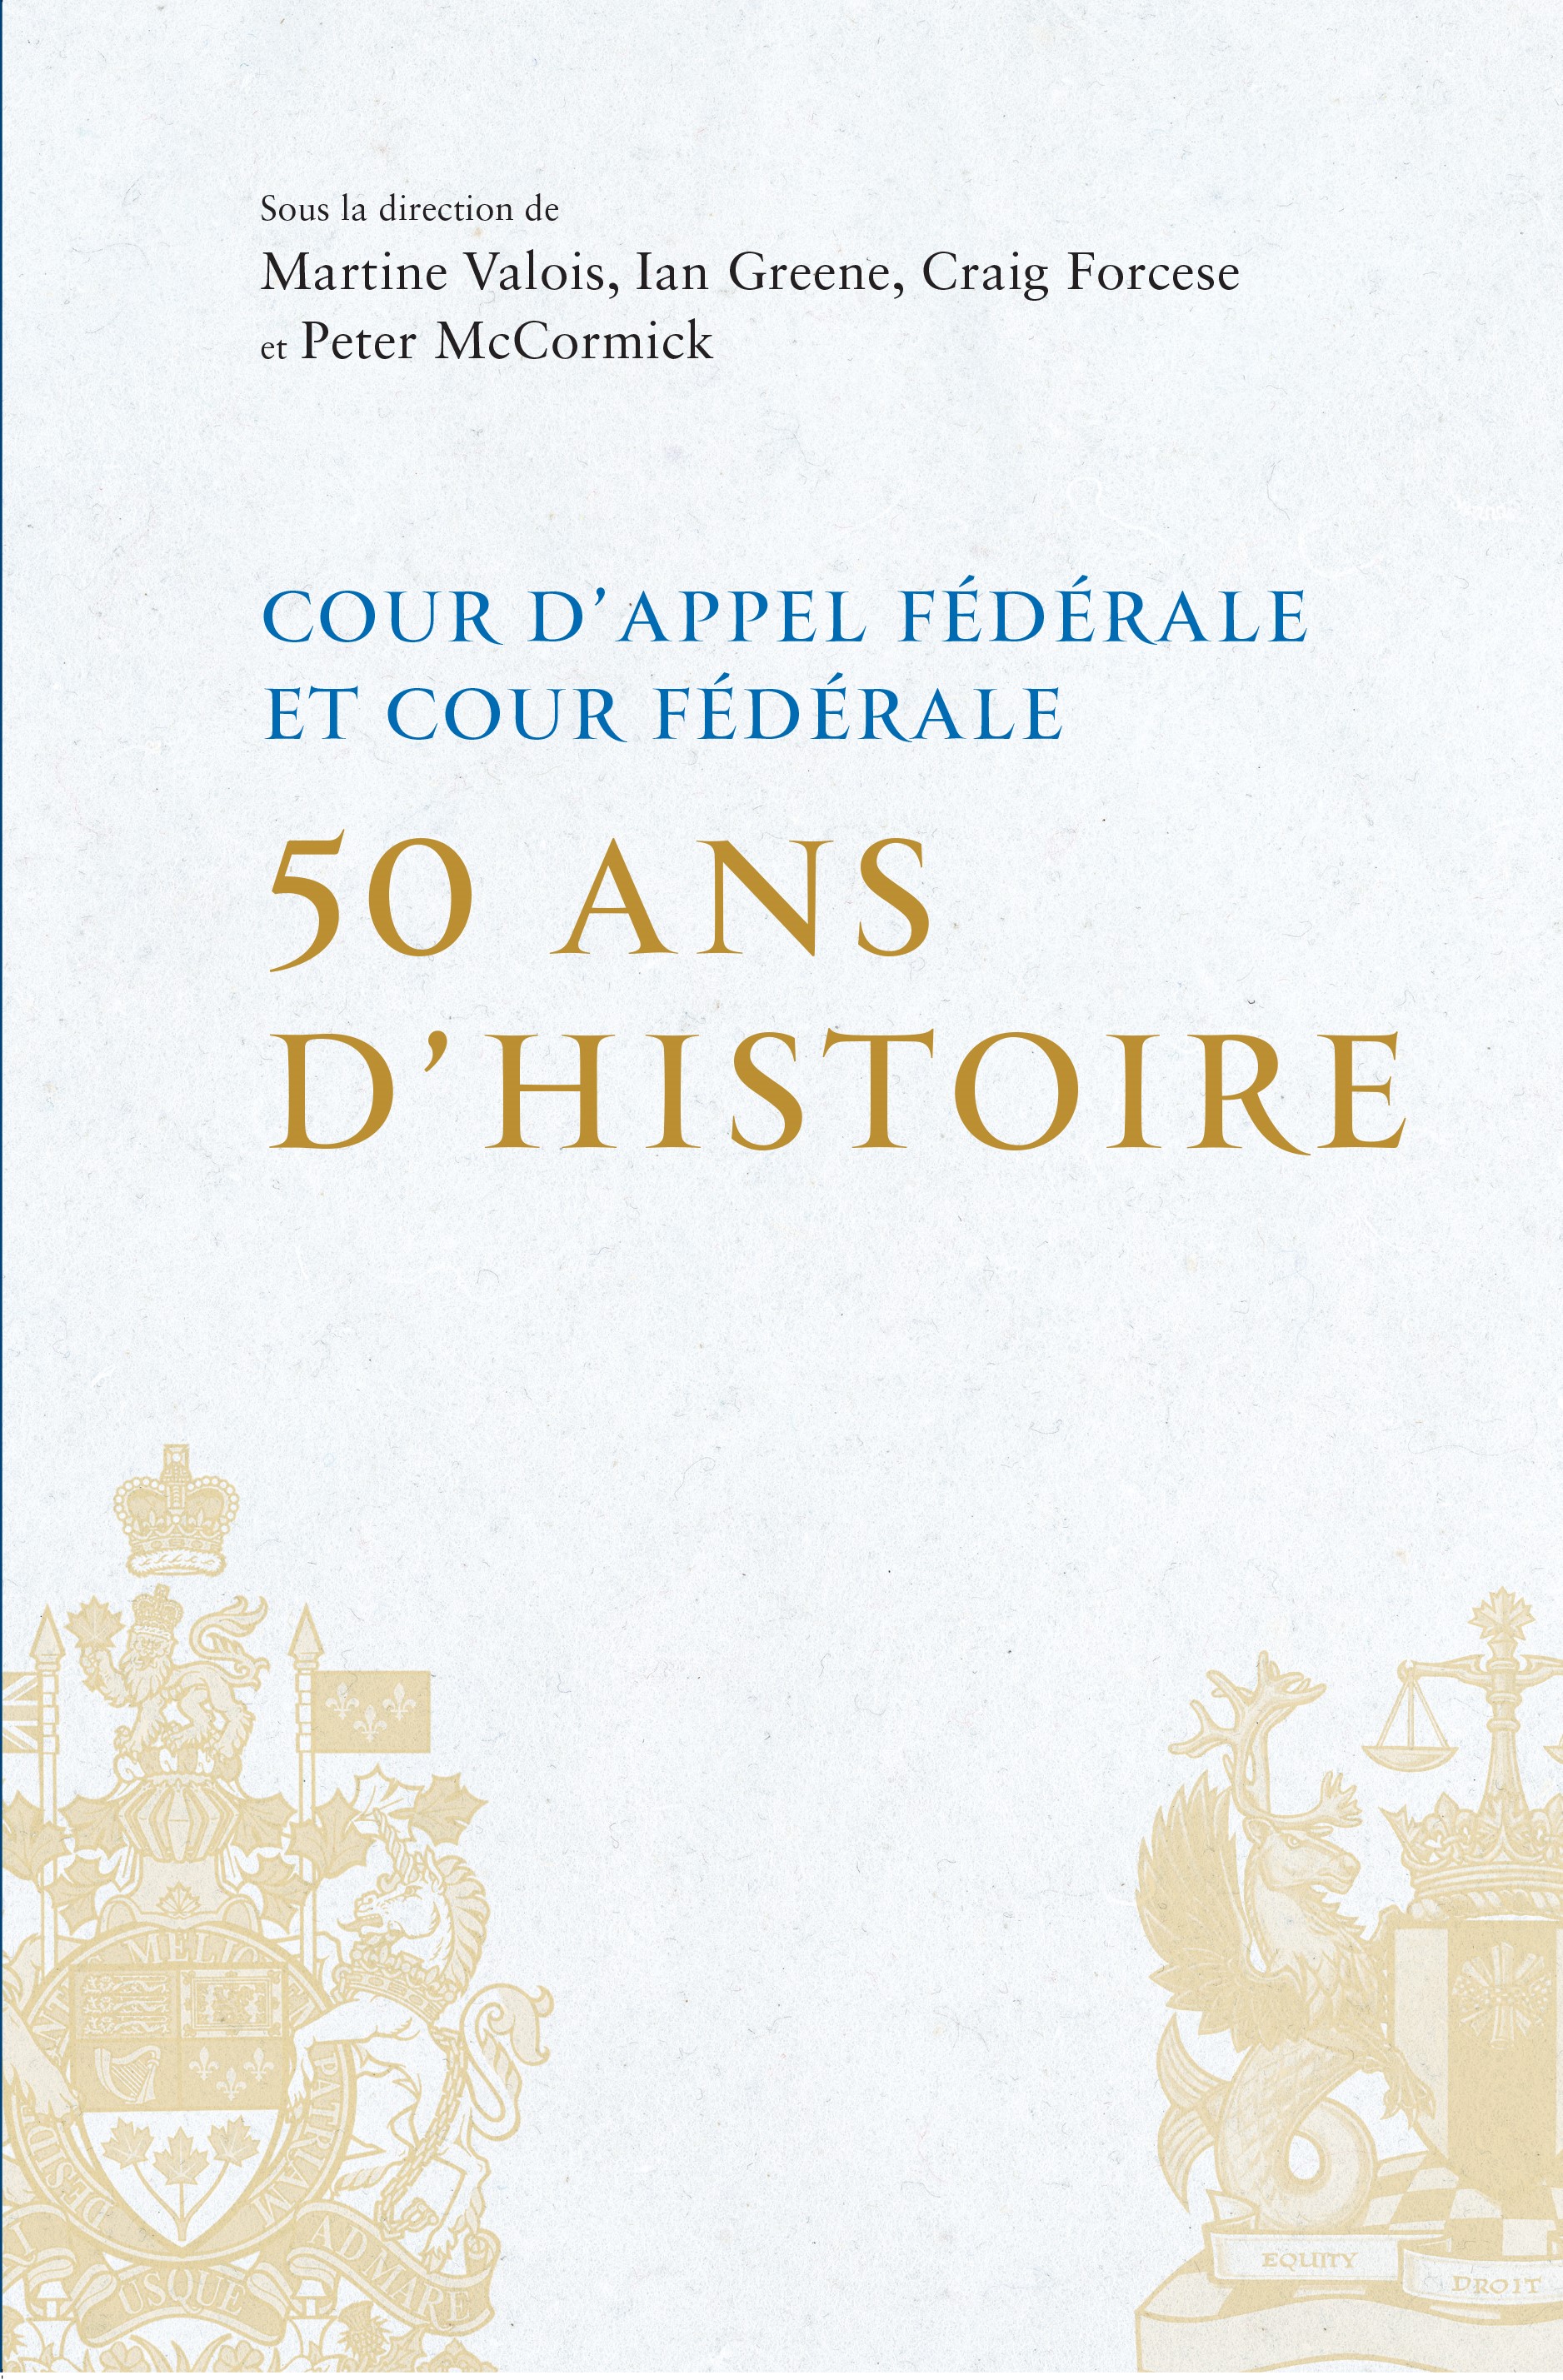 50 Years of History book cover french version